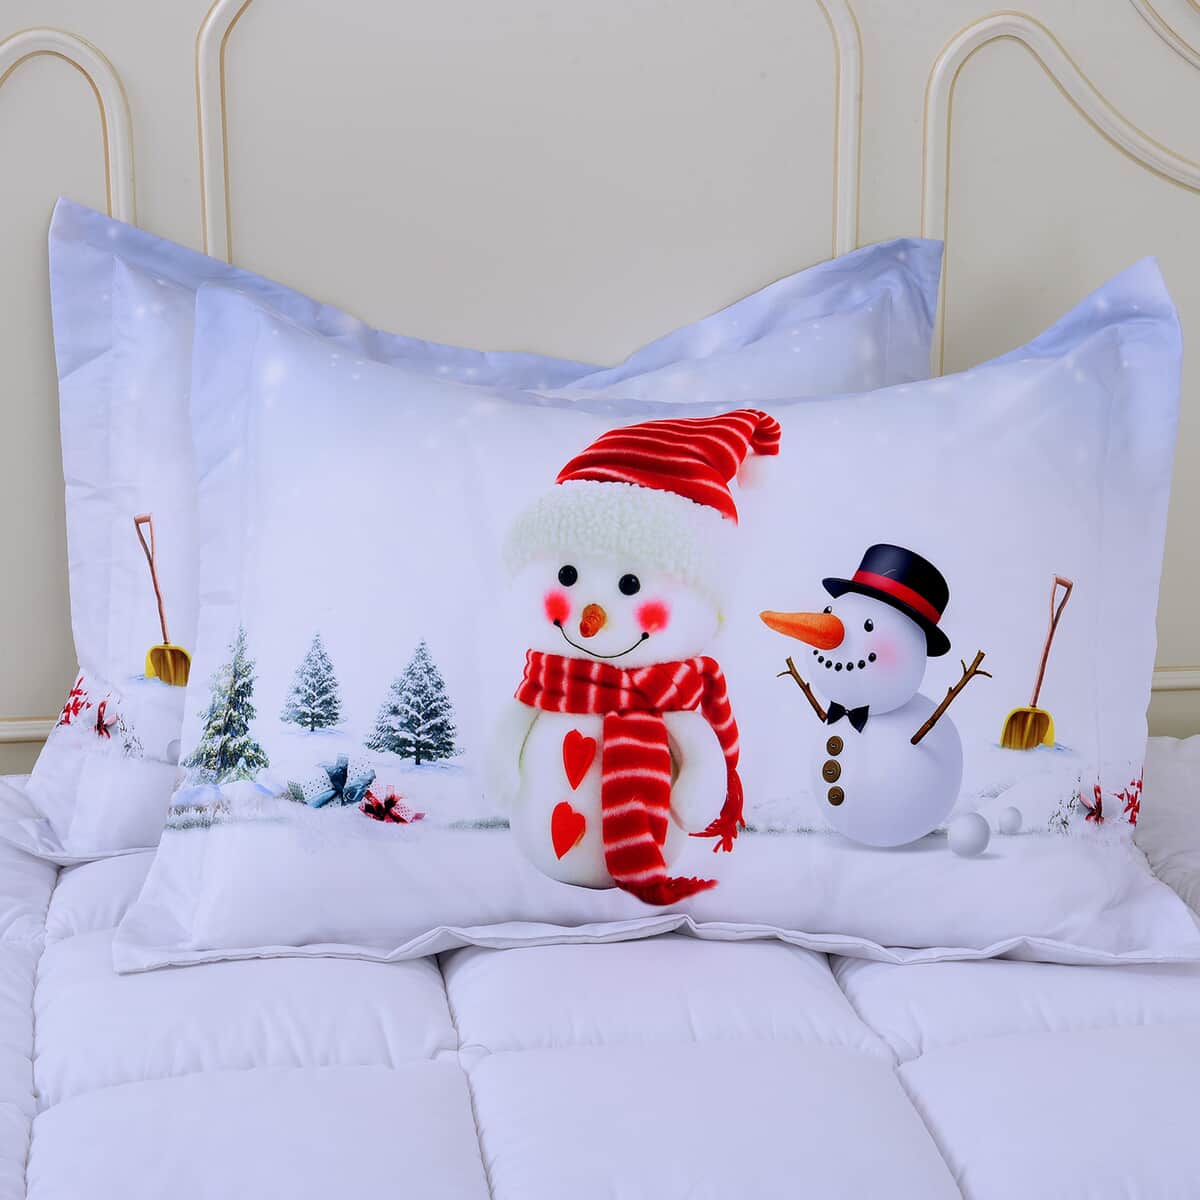 HOMESMART White Digital Printed Microfiber Snowman Friends Pattern Comforter (Queen, 86x92) and Set of 2 Shams (20x26) image number 1